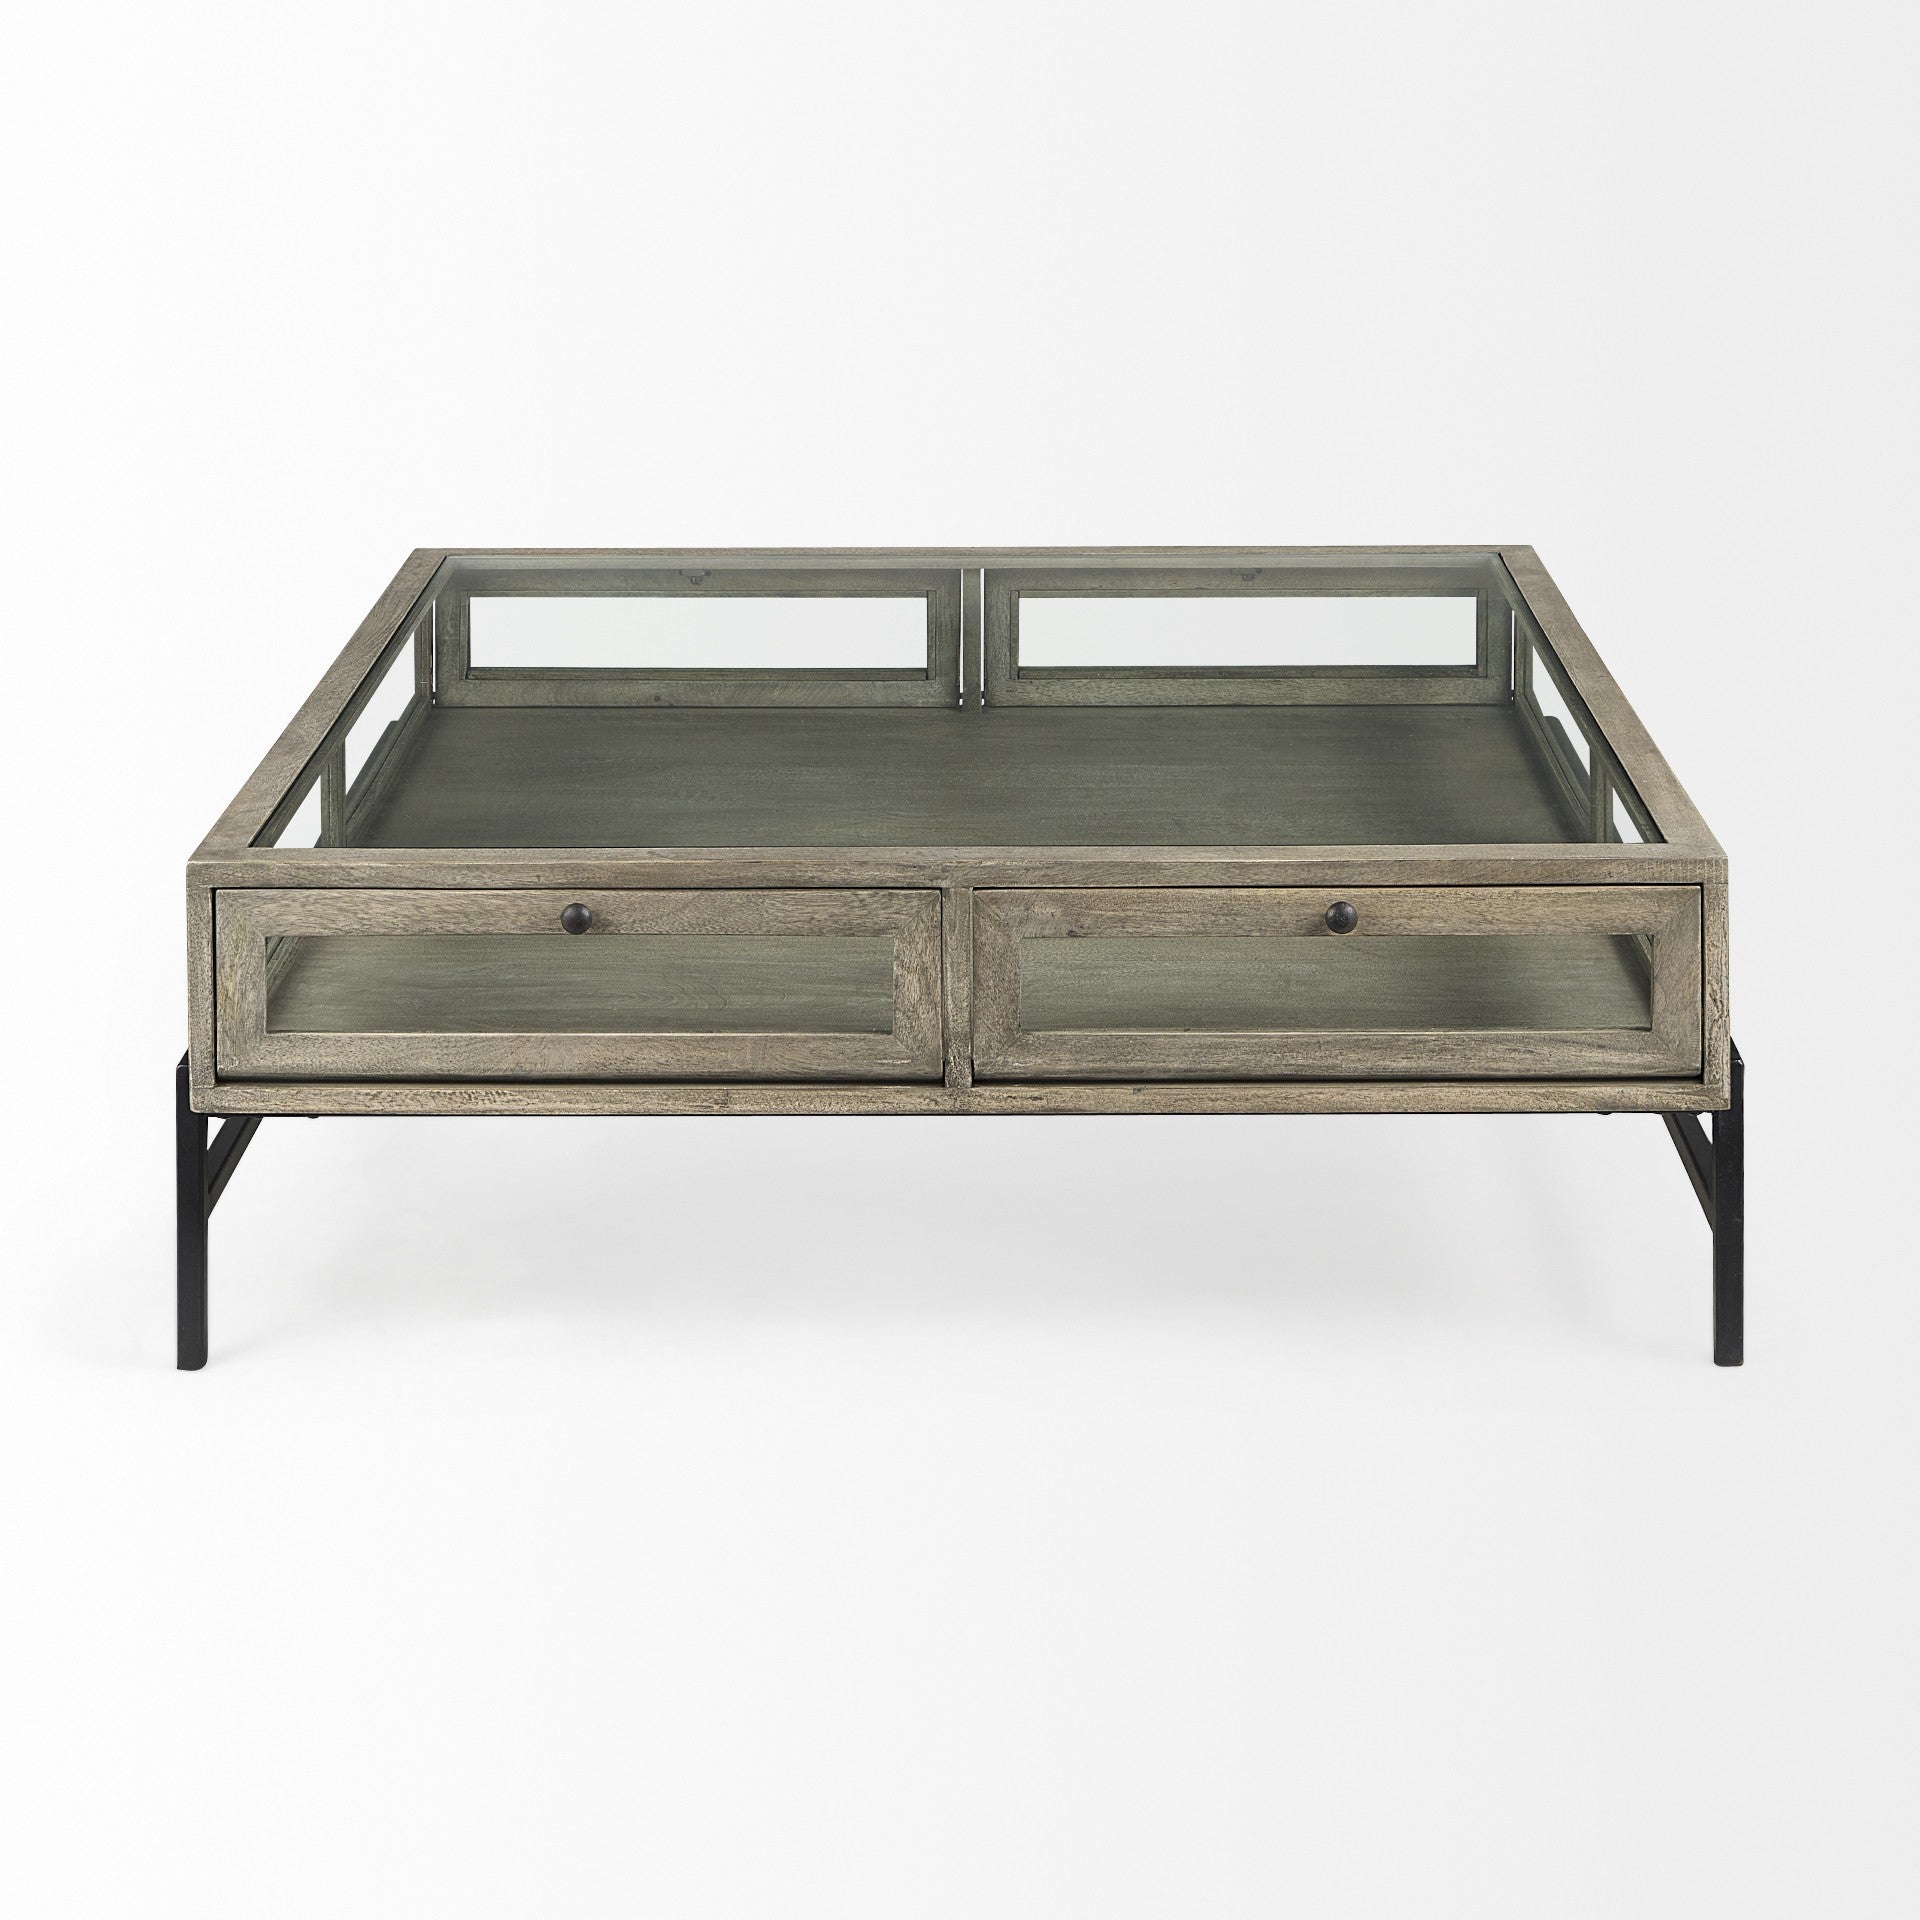 42" Gray And Black Glass And Metal Square Coffee Table With Shelf